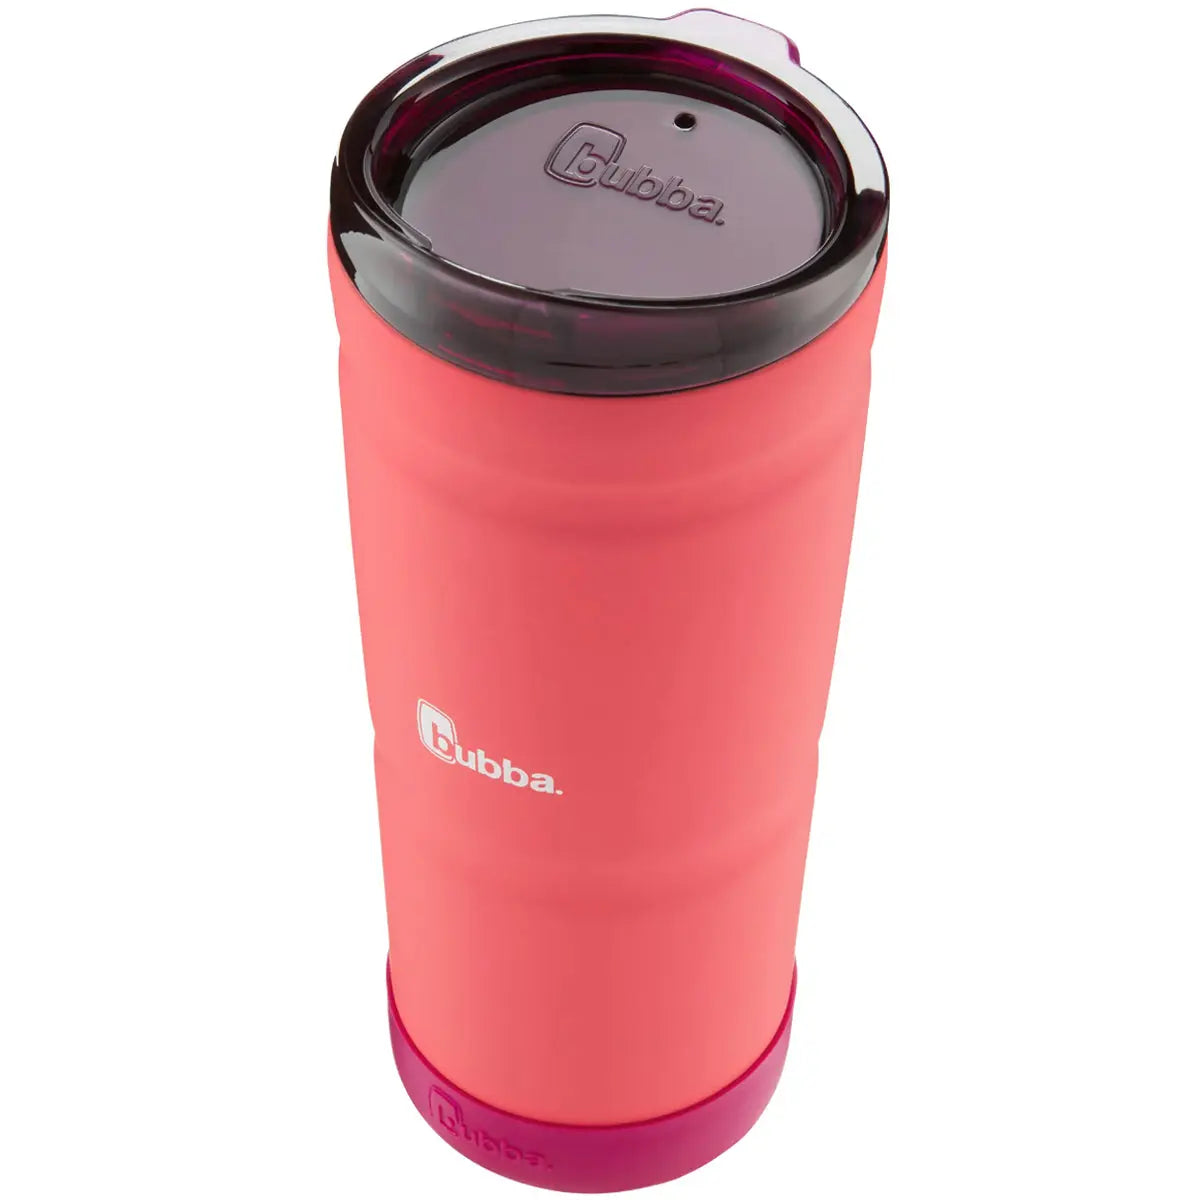 Bubba 24 oz. Envy Vacuum Insulated Stainless Steel Tumbler with Removable Bumper Bubba